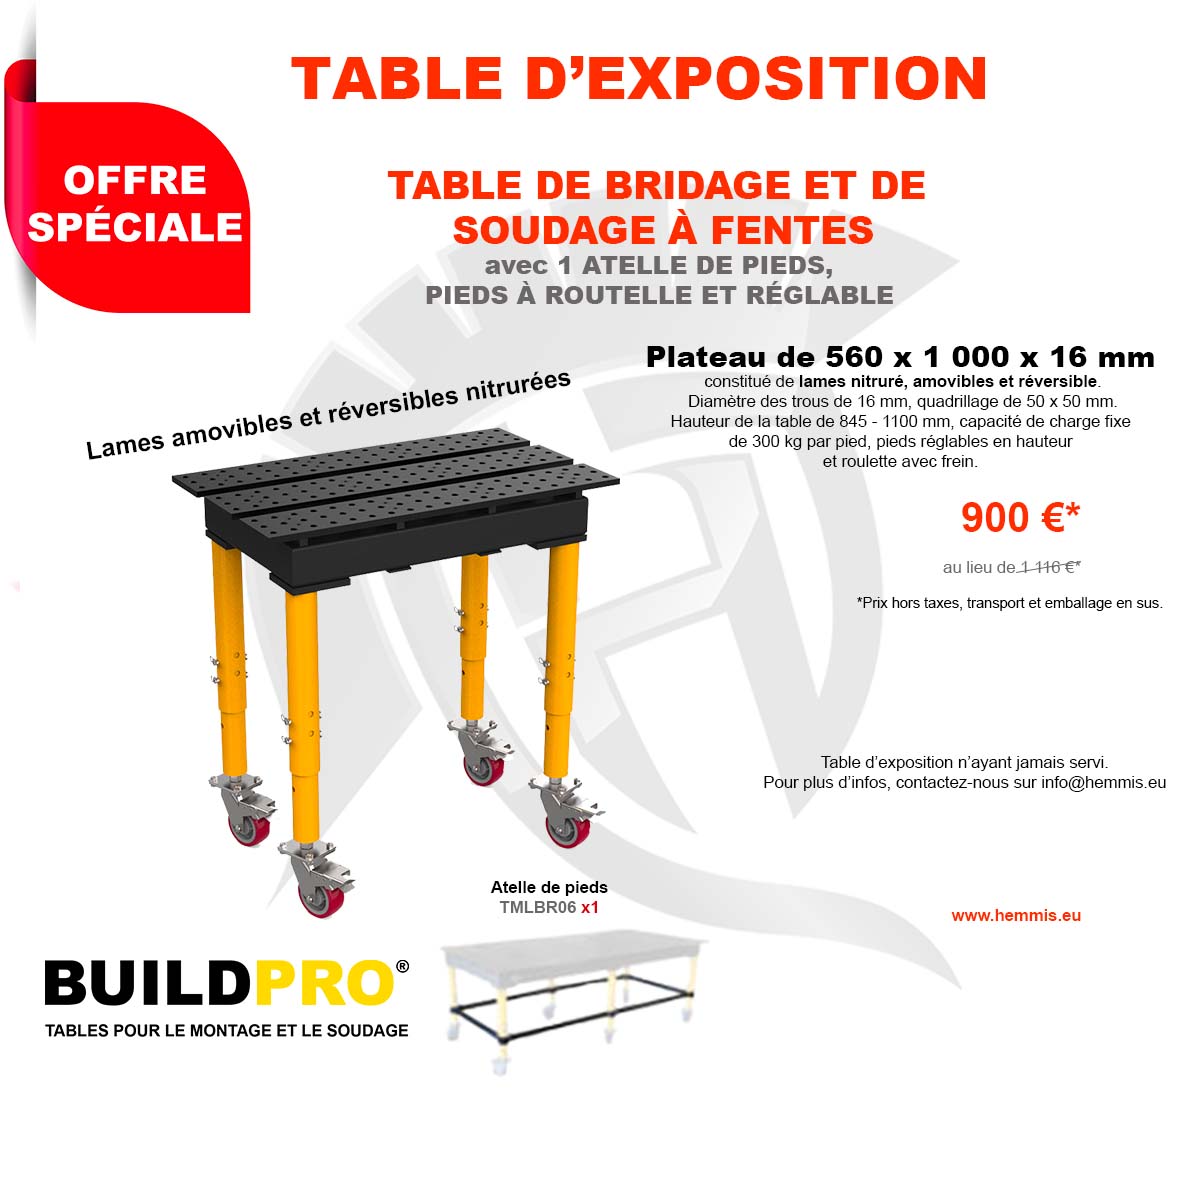 offre spéciale table d'exposition buildpro 560-1000